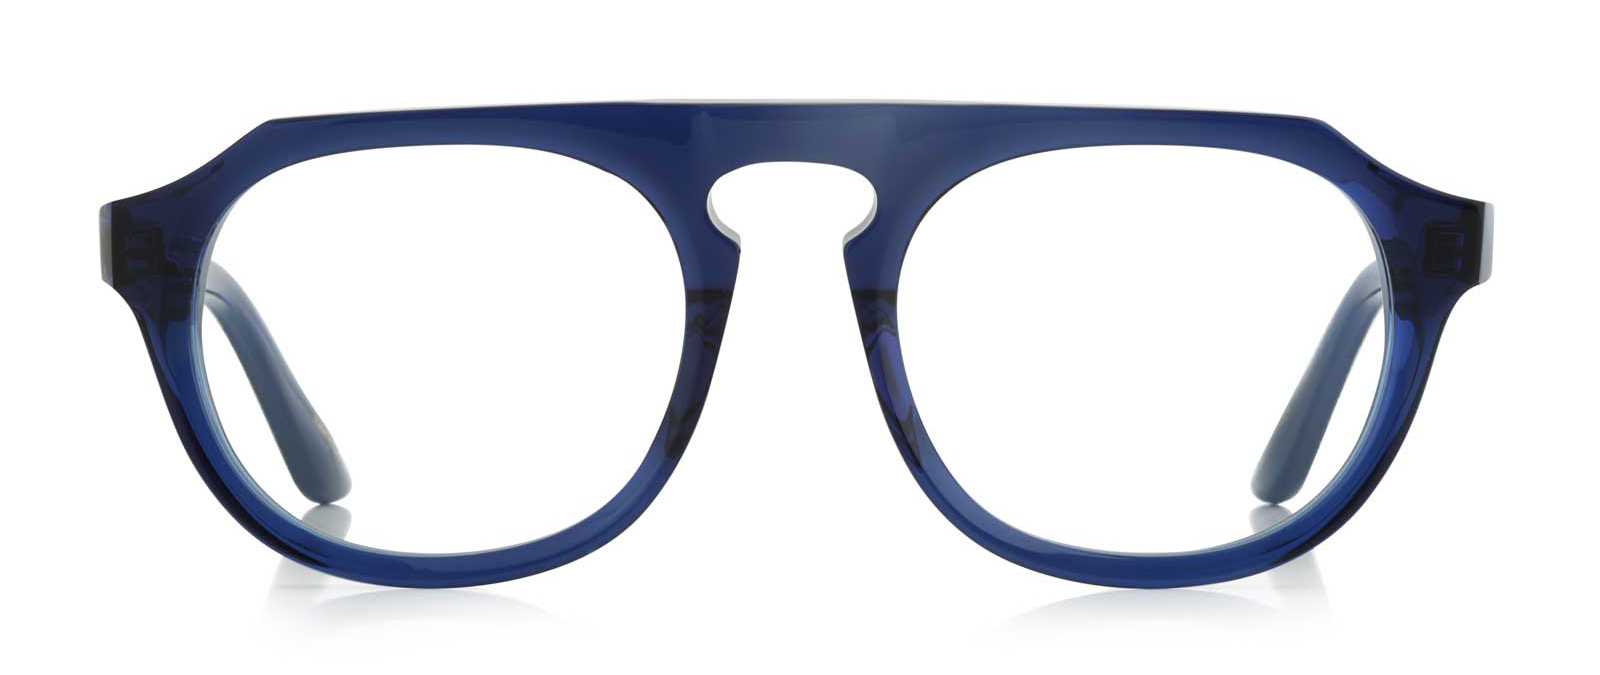 Rounded, blue plastic frame with a keyhole bridge